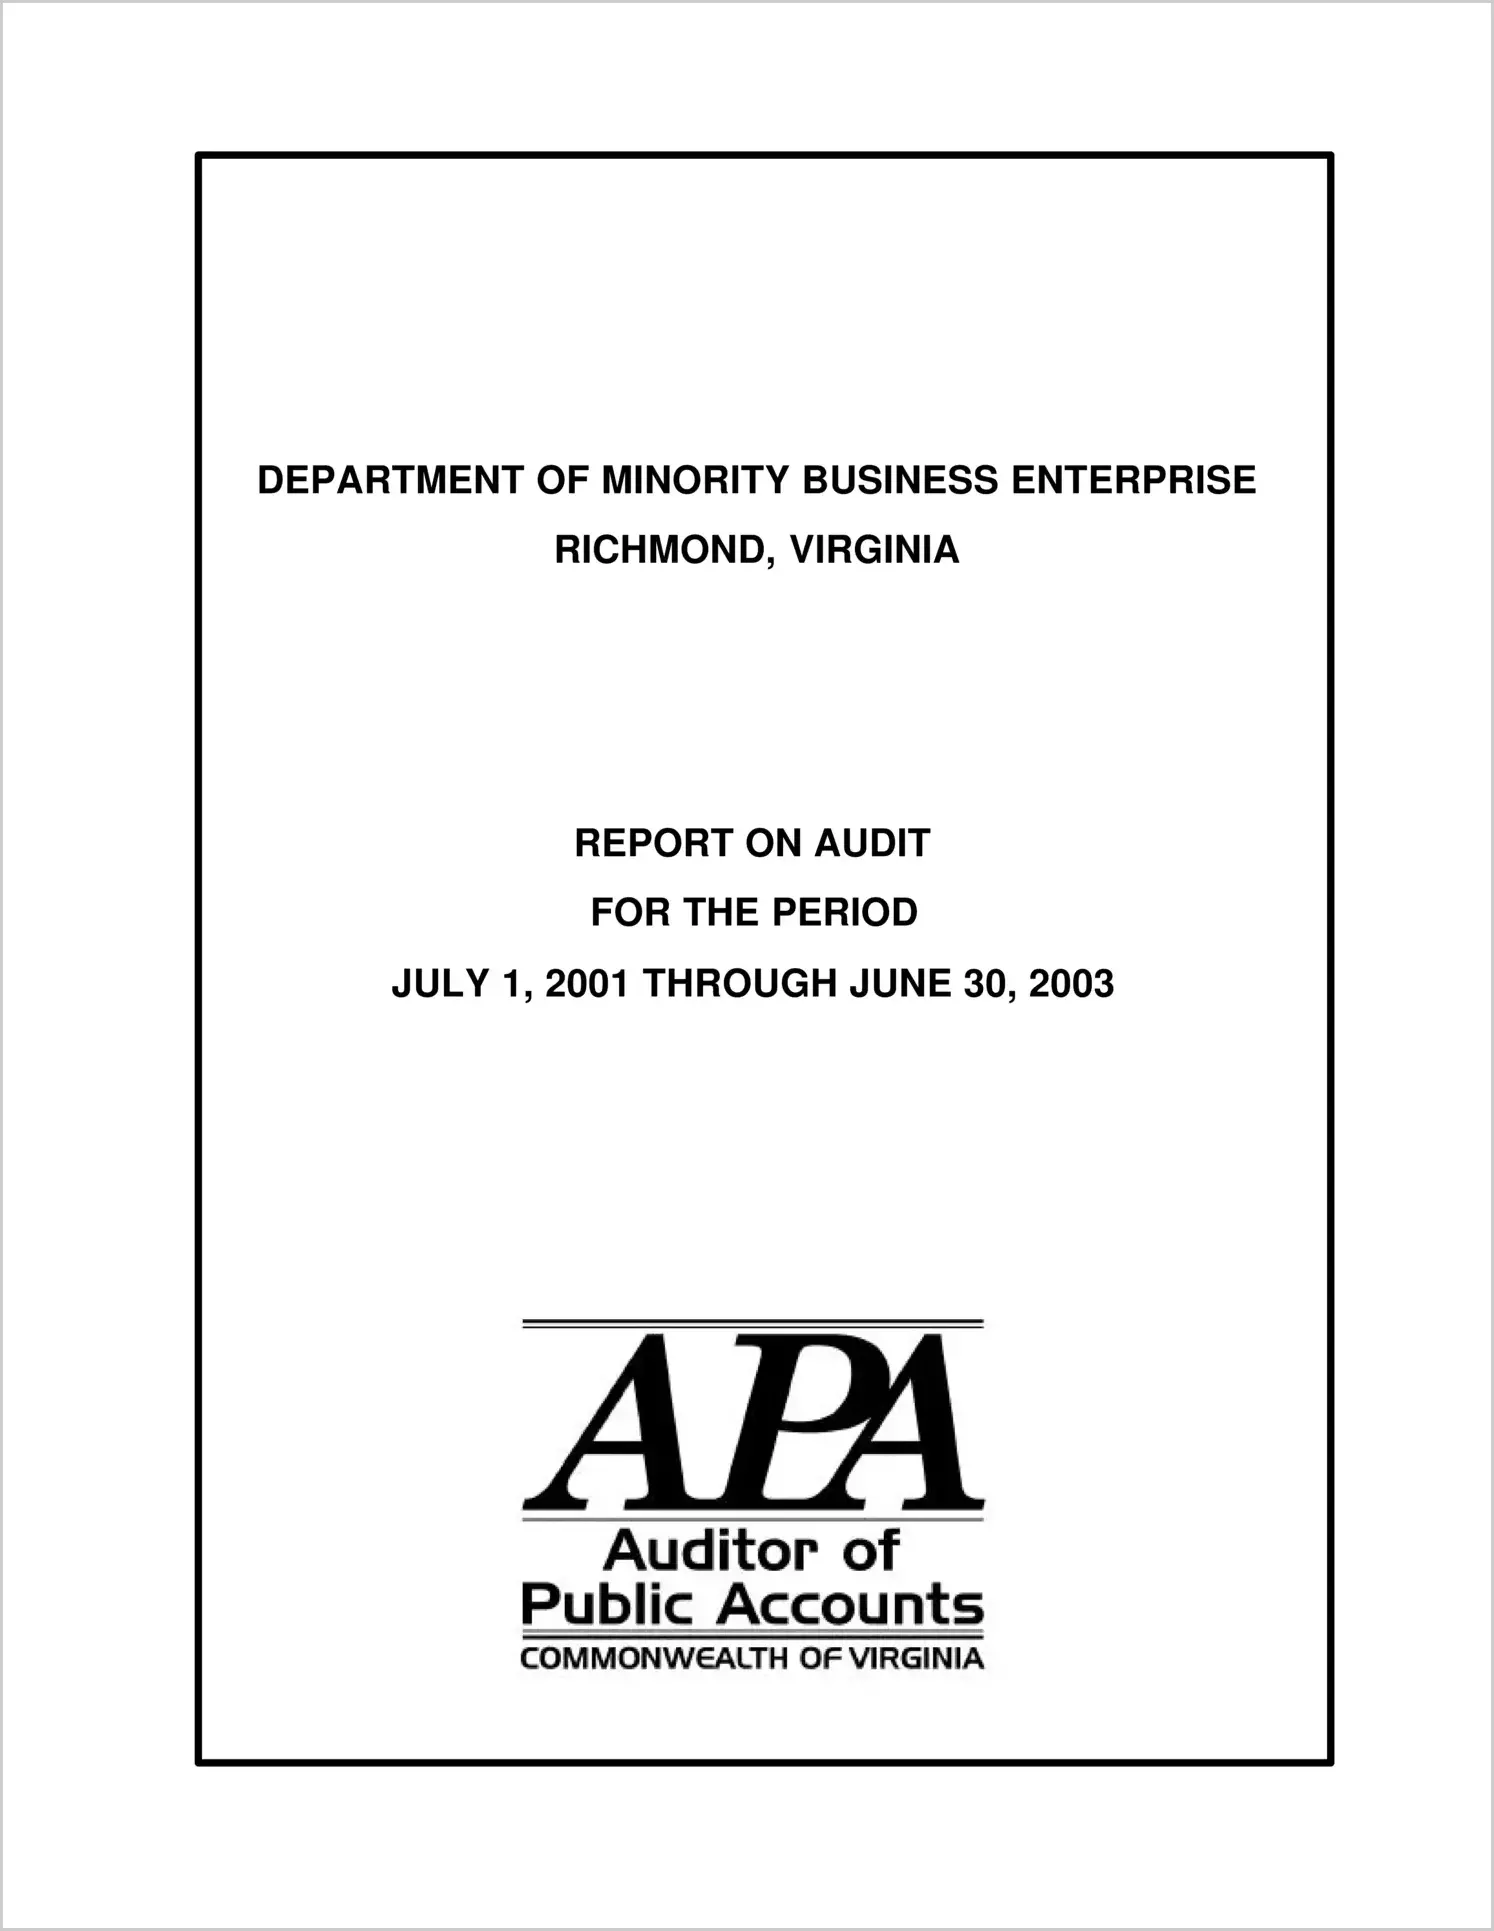 Department of Minority Business Enterprise for the period July 1, 2001 through June 30, 2003